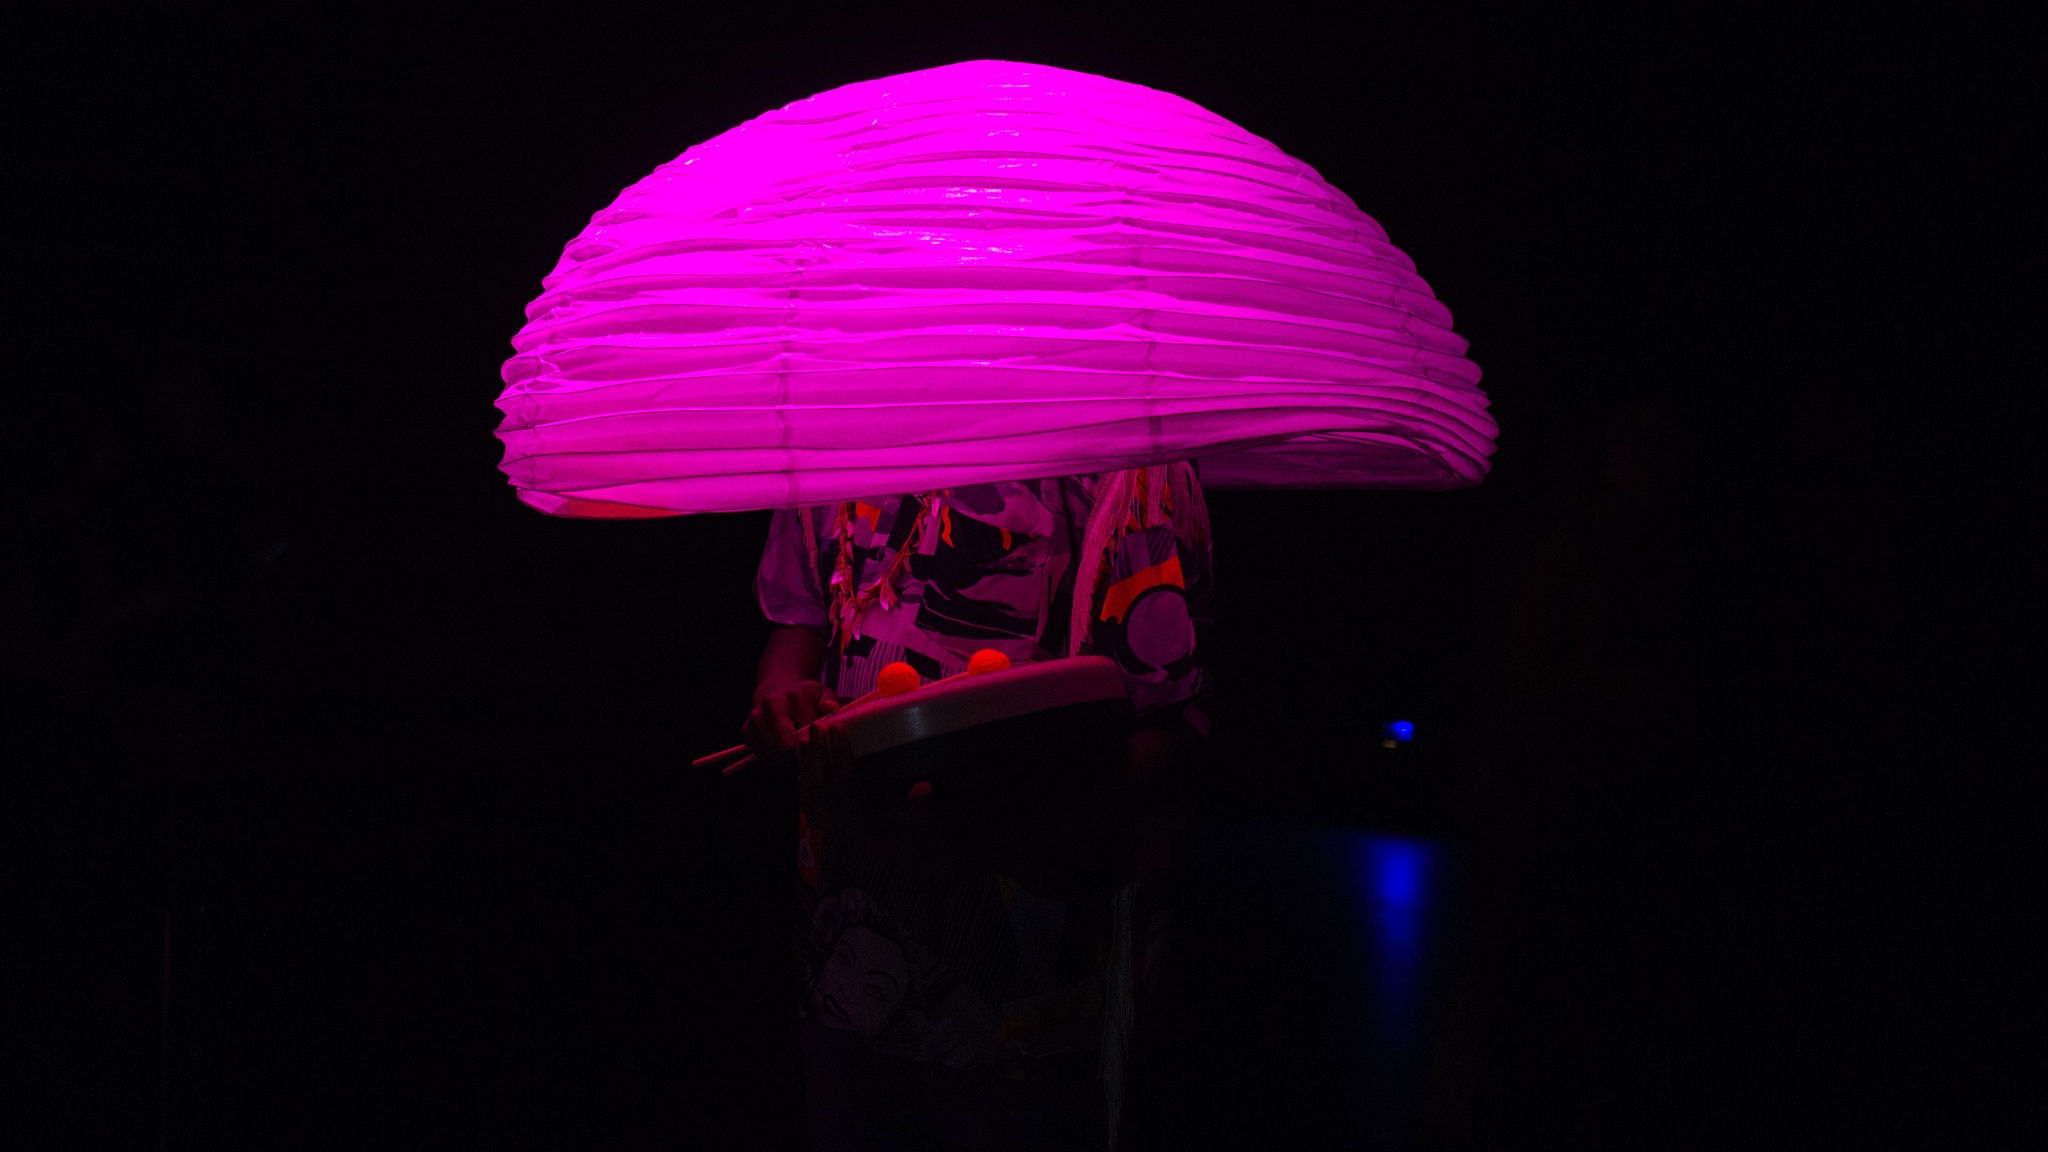 Person in pink light, under mushroom-like crepe object covering their upper body.